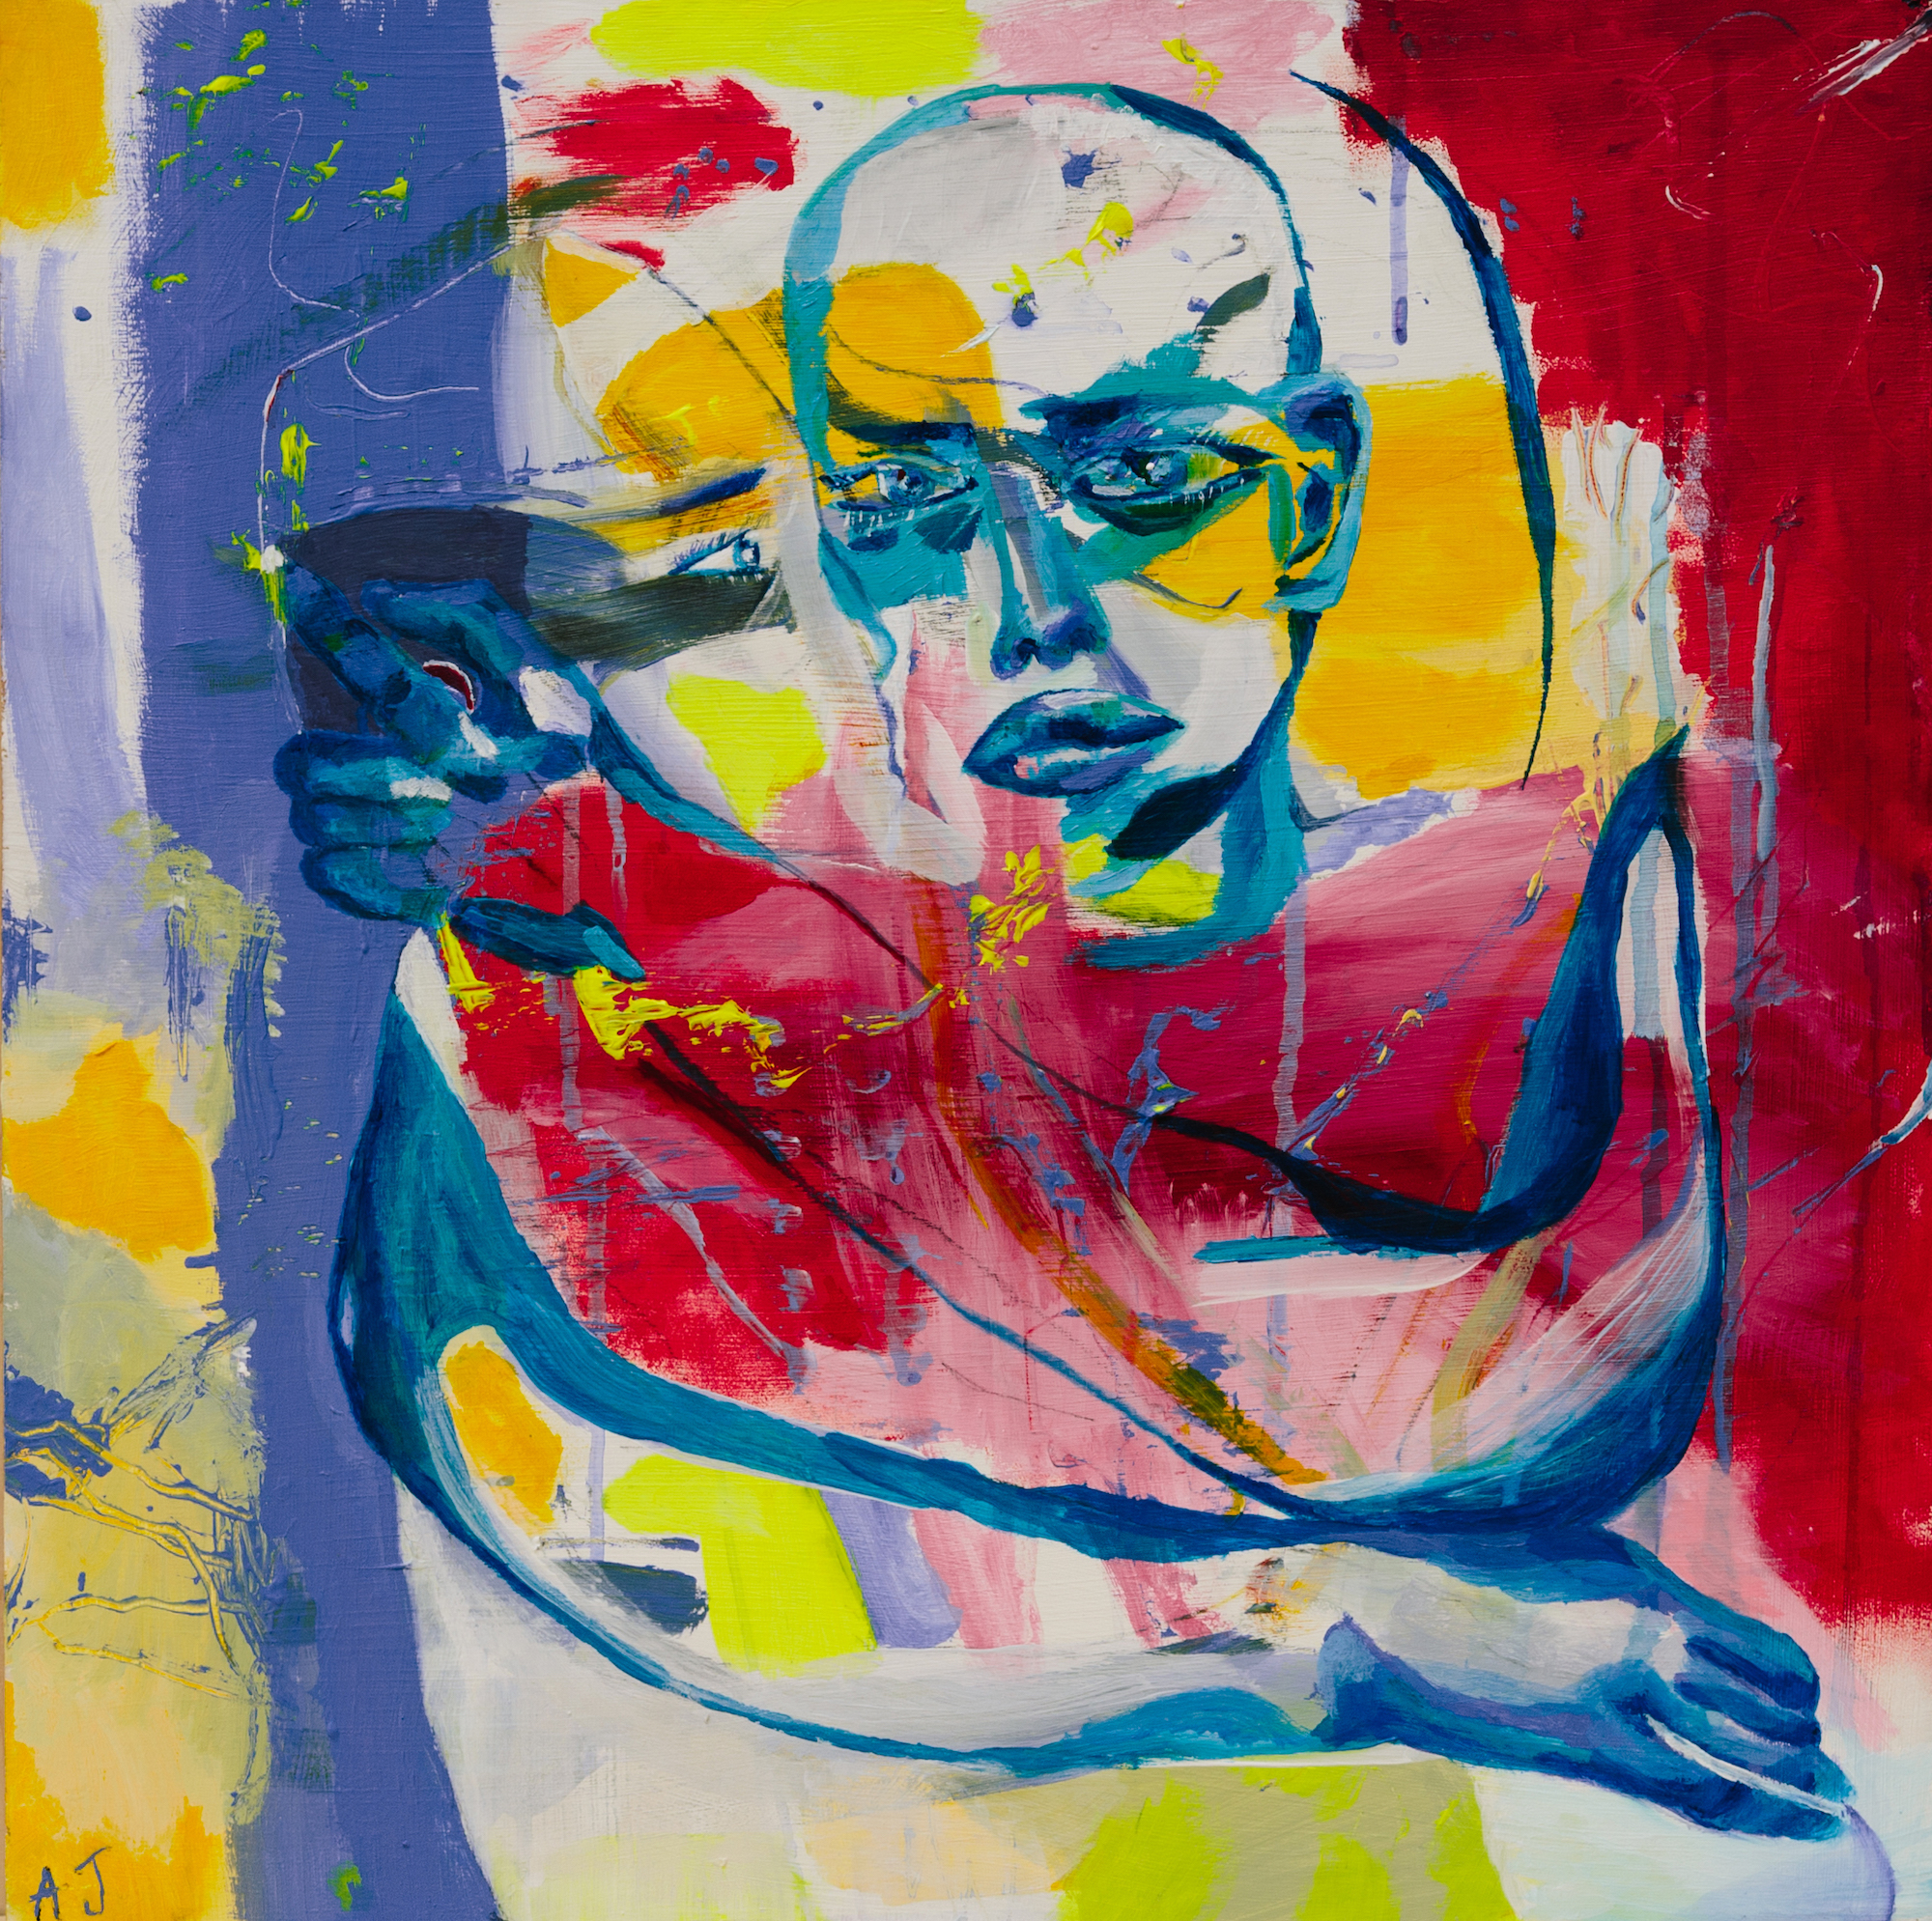 A full view of the painting, showing two figures embracing. The image is covered with expressive marks of bright blues, yellows, reds and pinks.